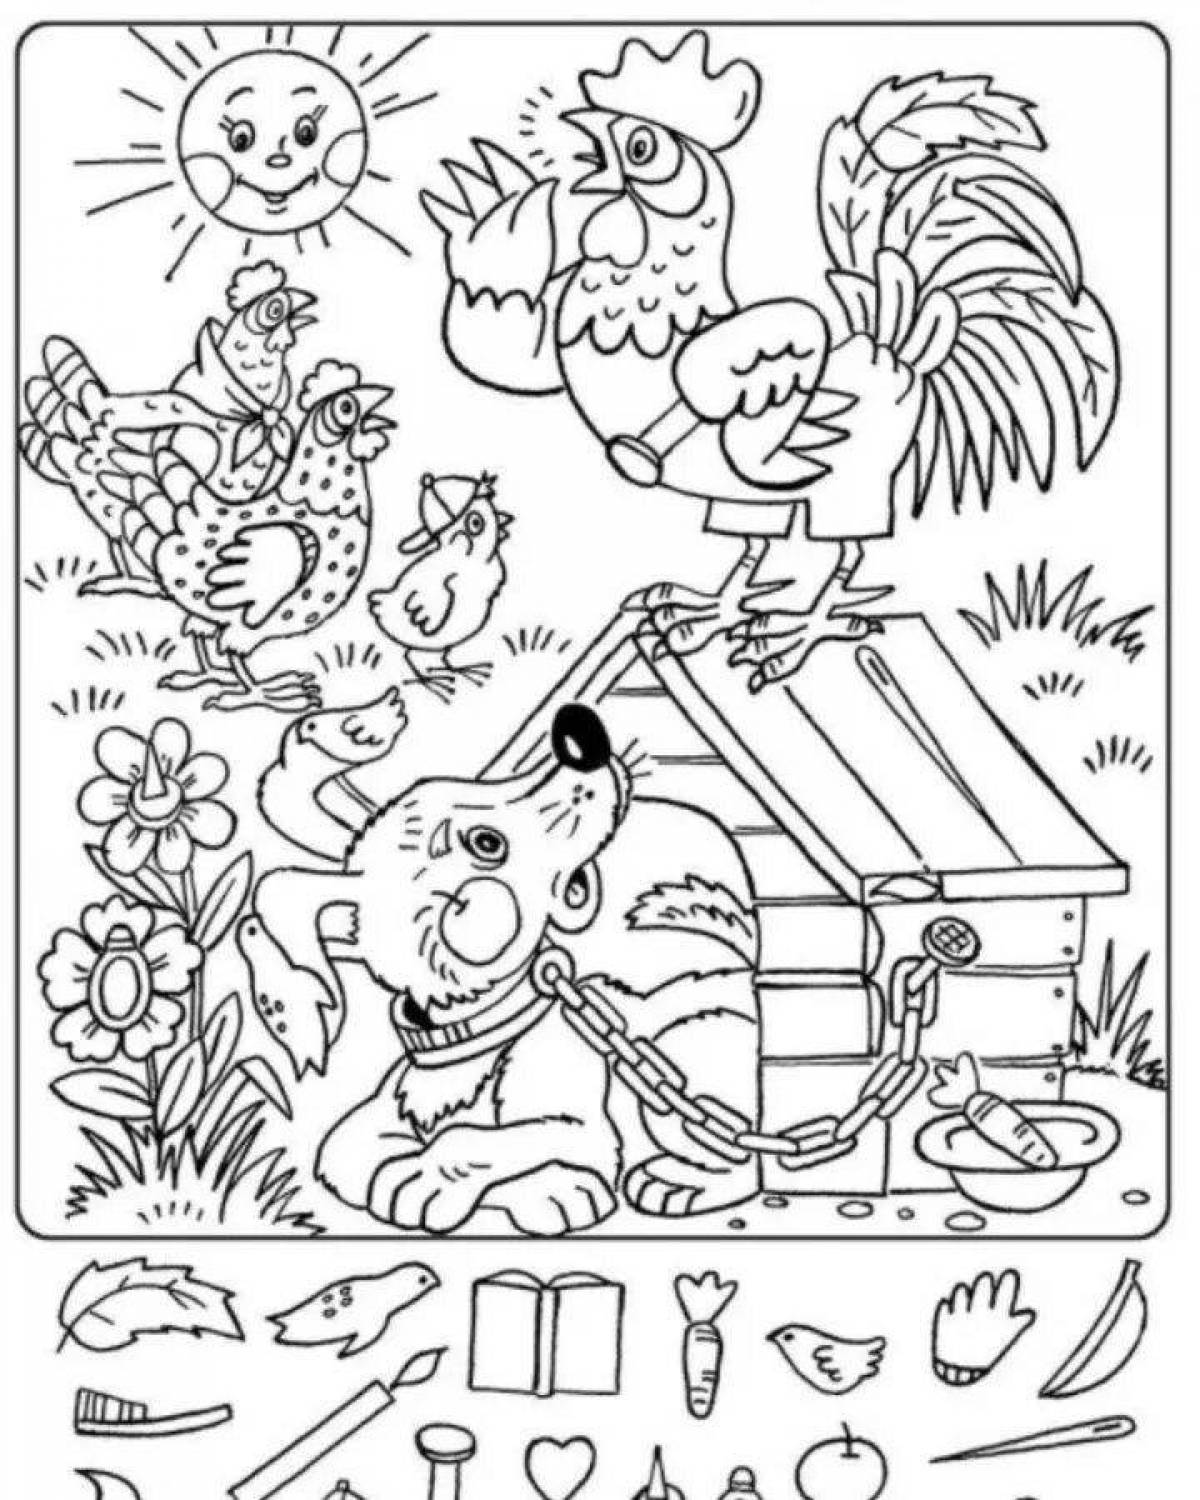 Color-explosion coloring page hidden objects